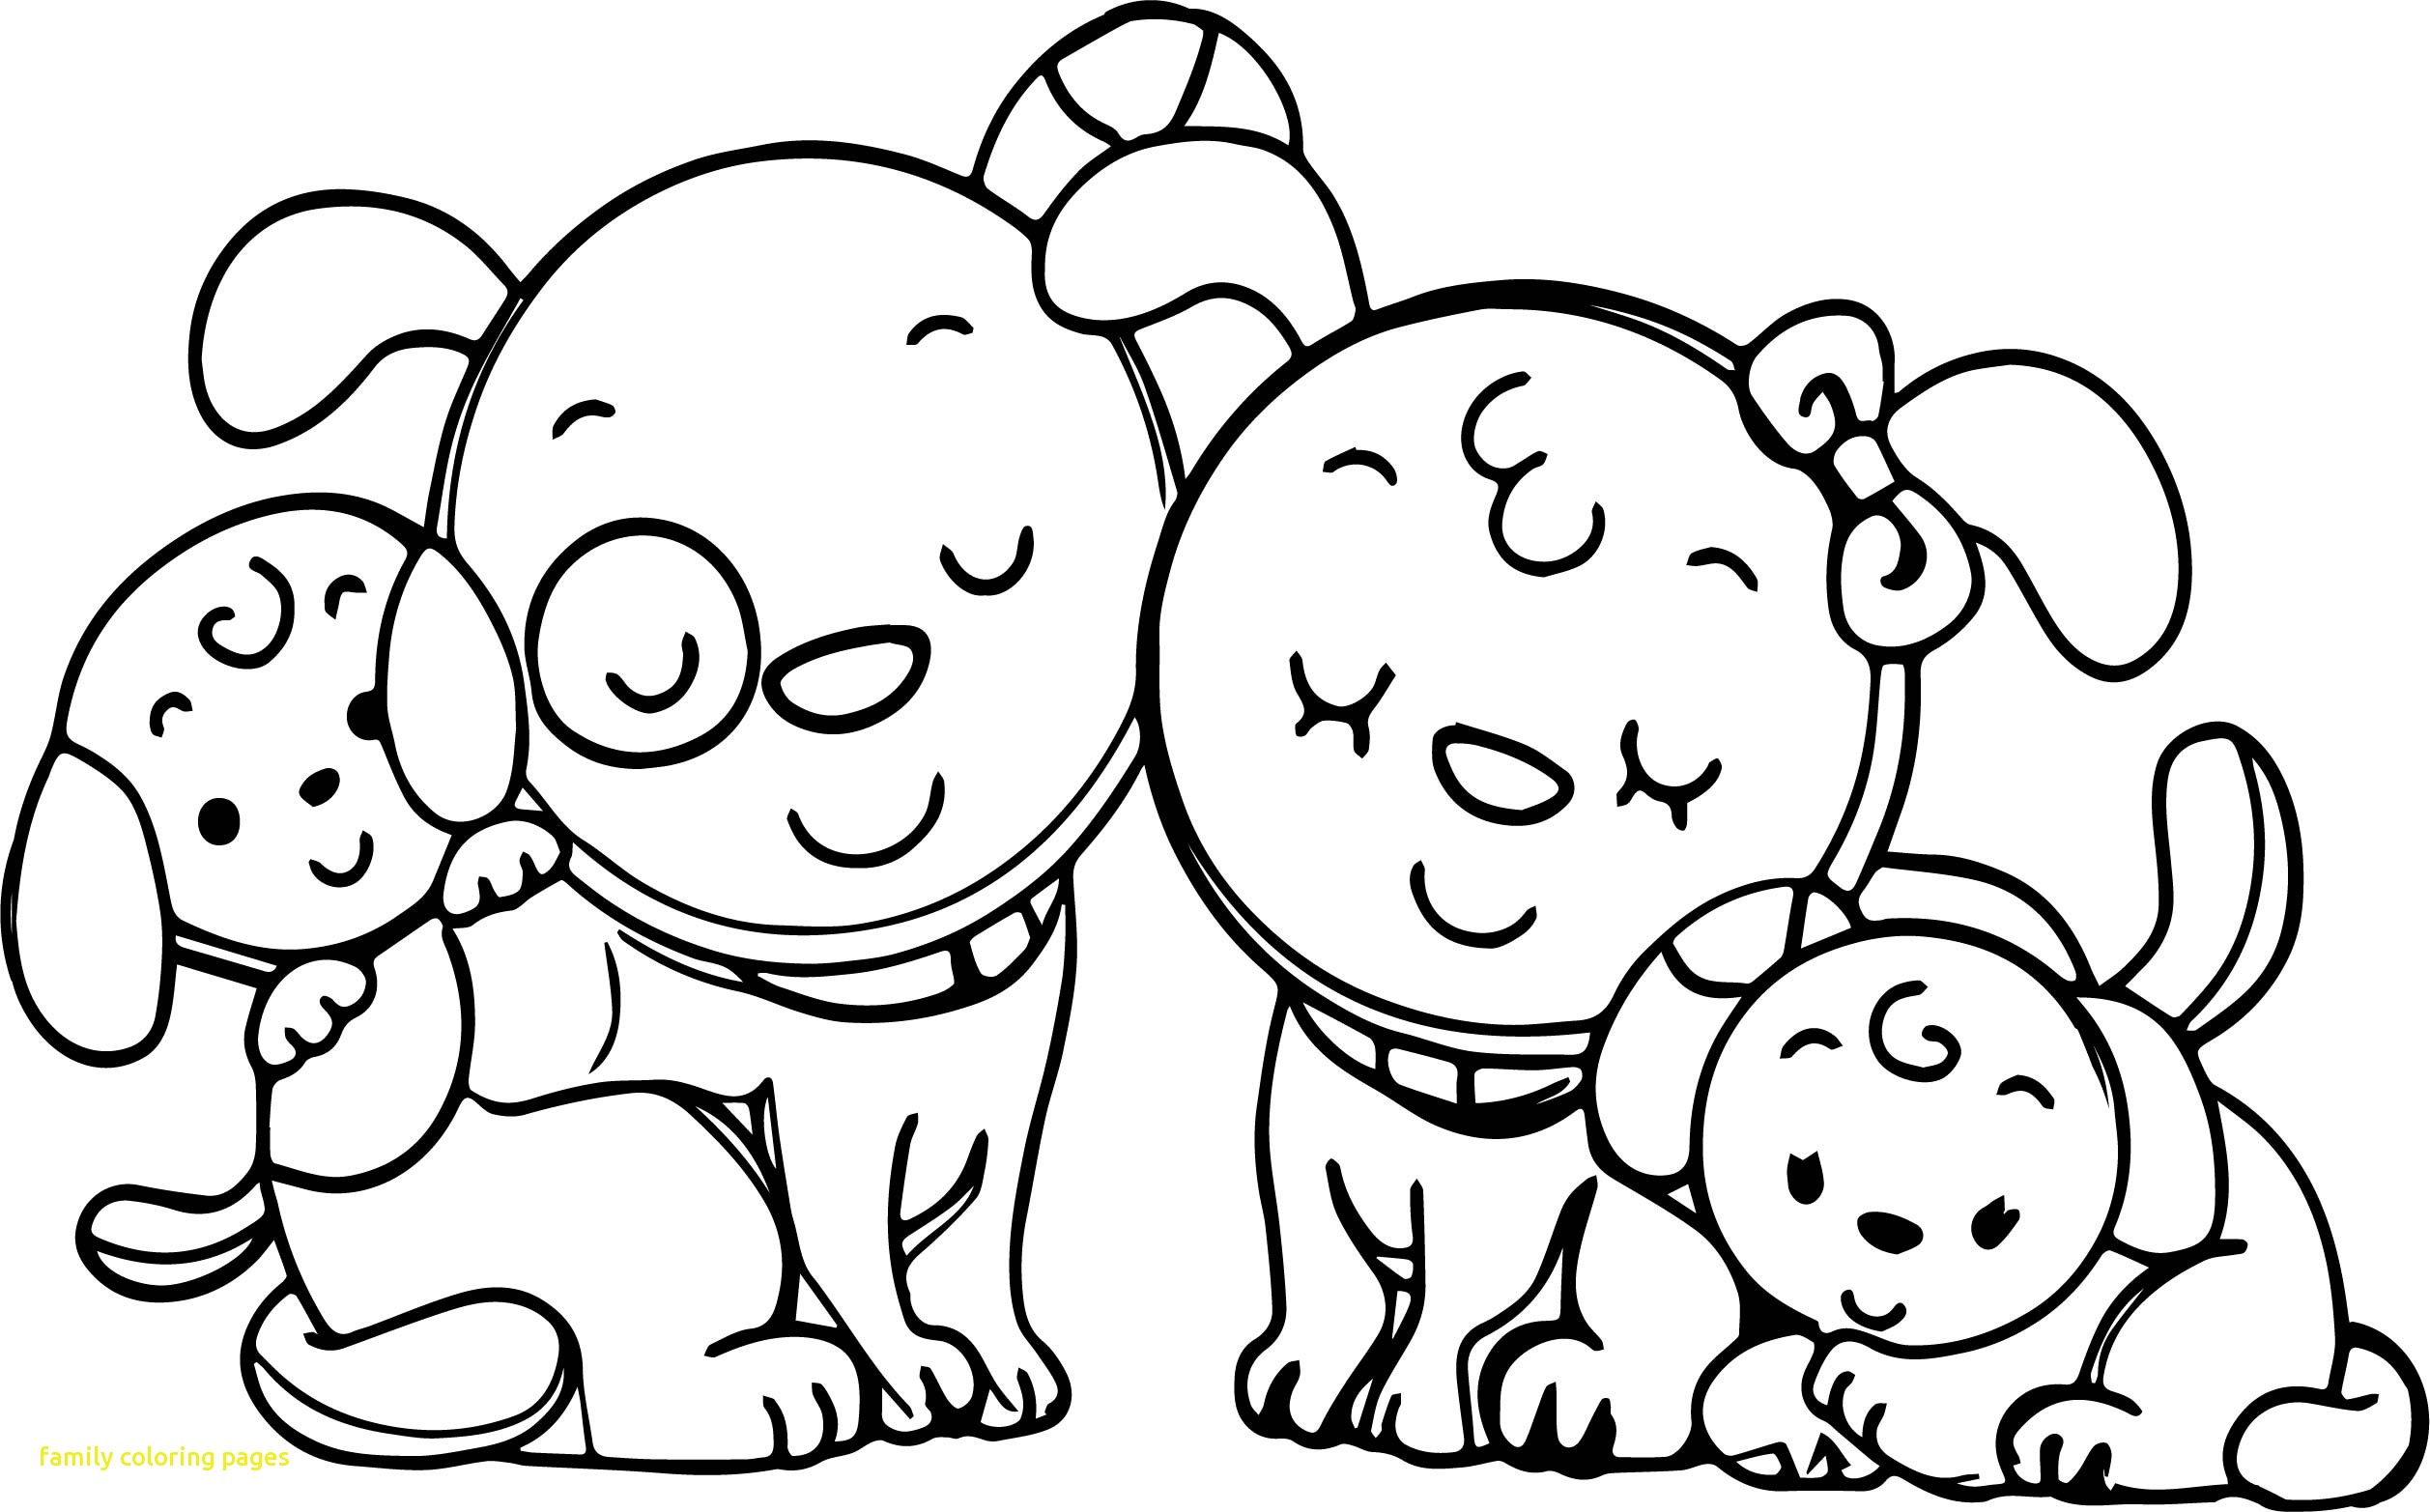 family-coloring-pages-for-preschoolers-at-getcolorings-free-printable-colorings-pages-to